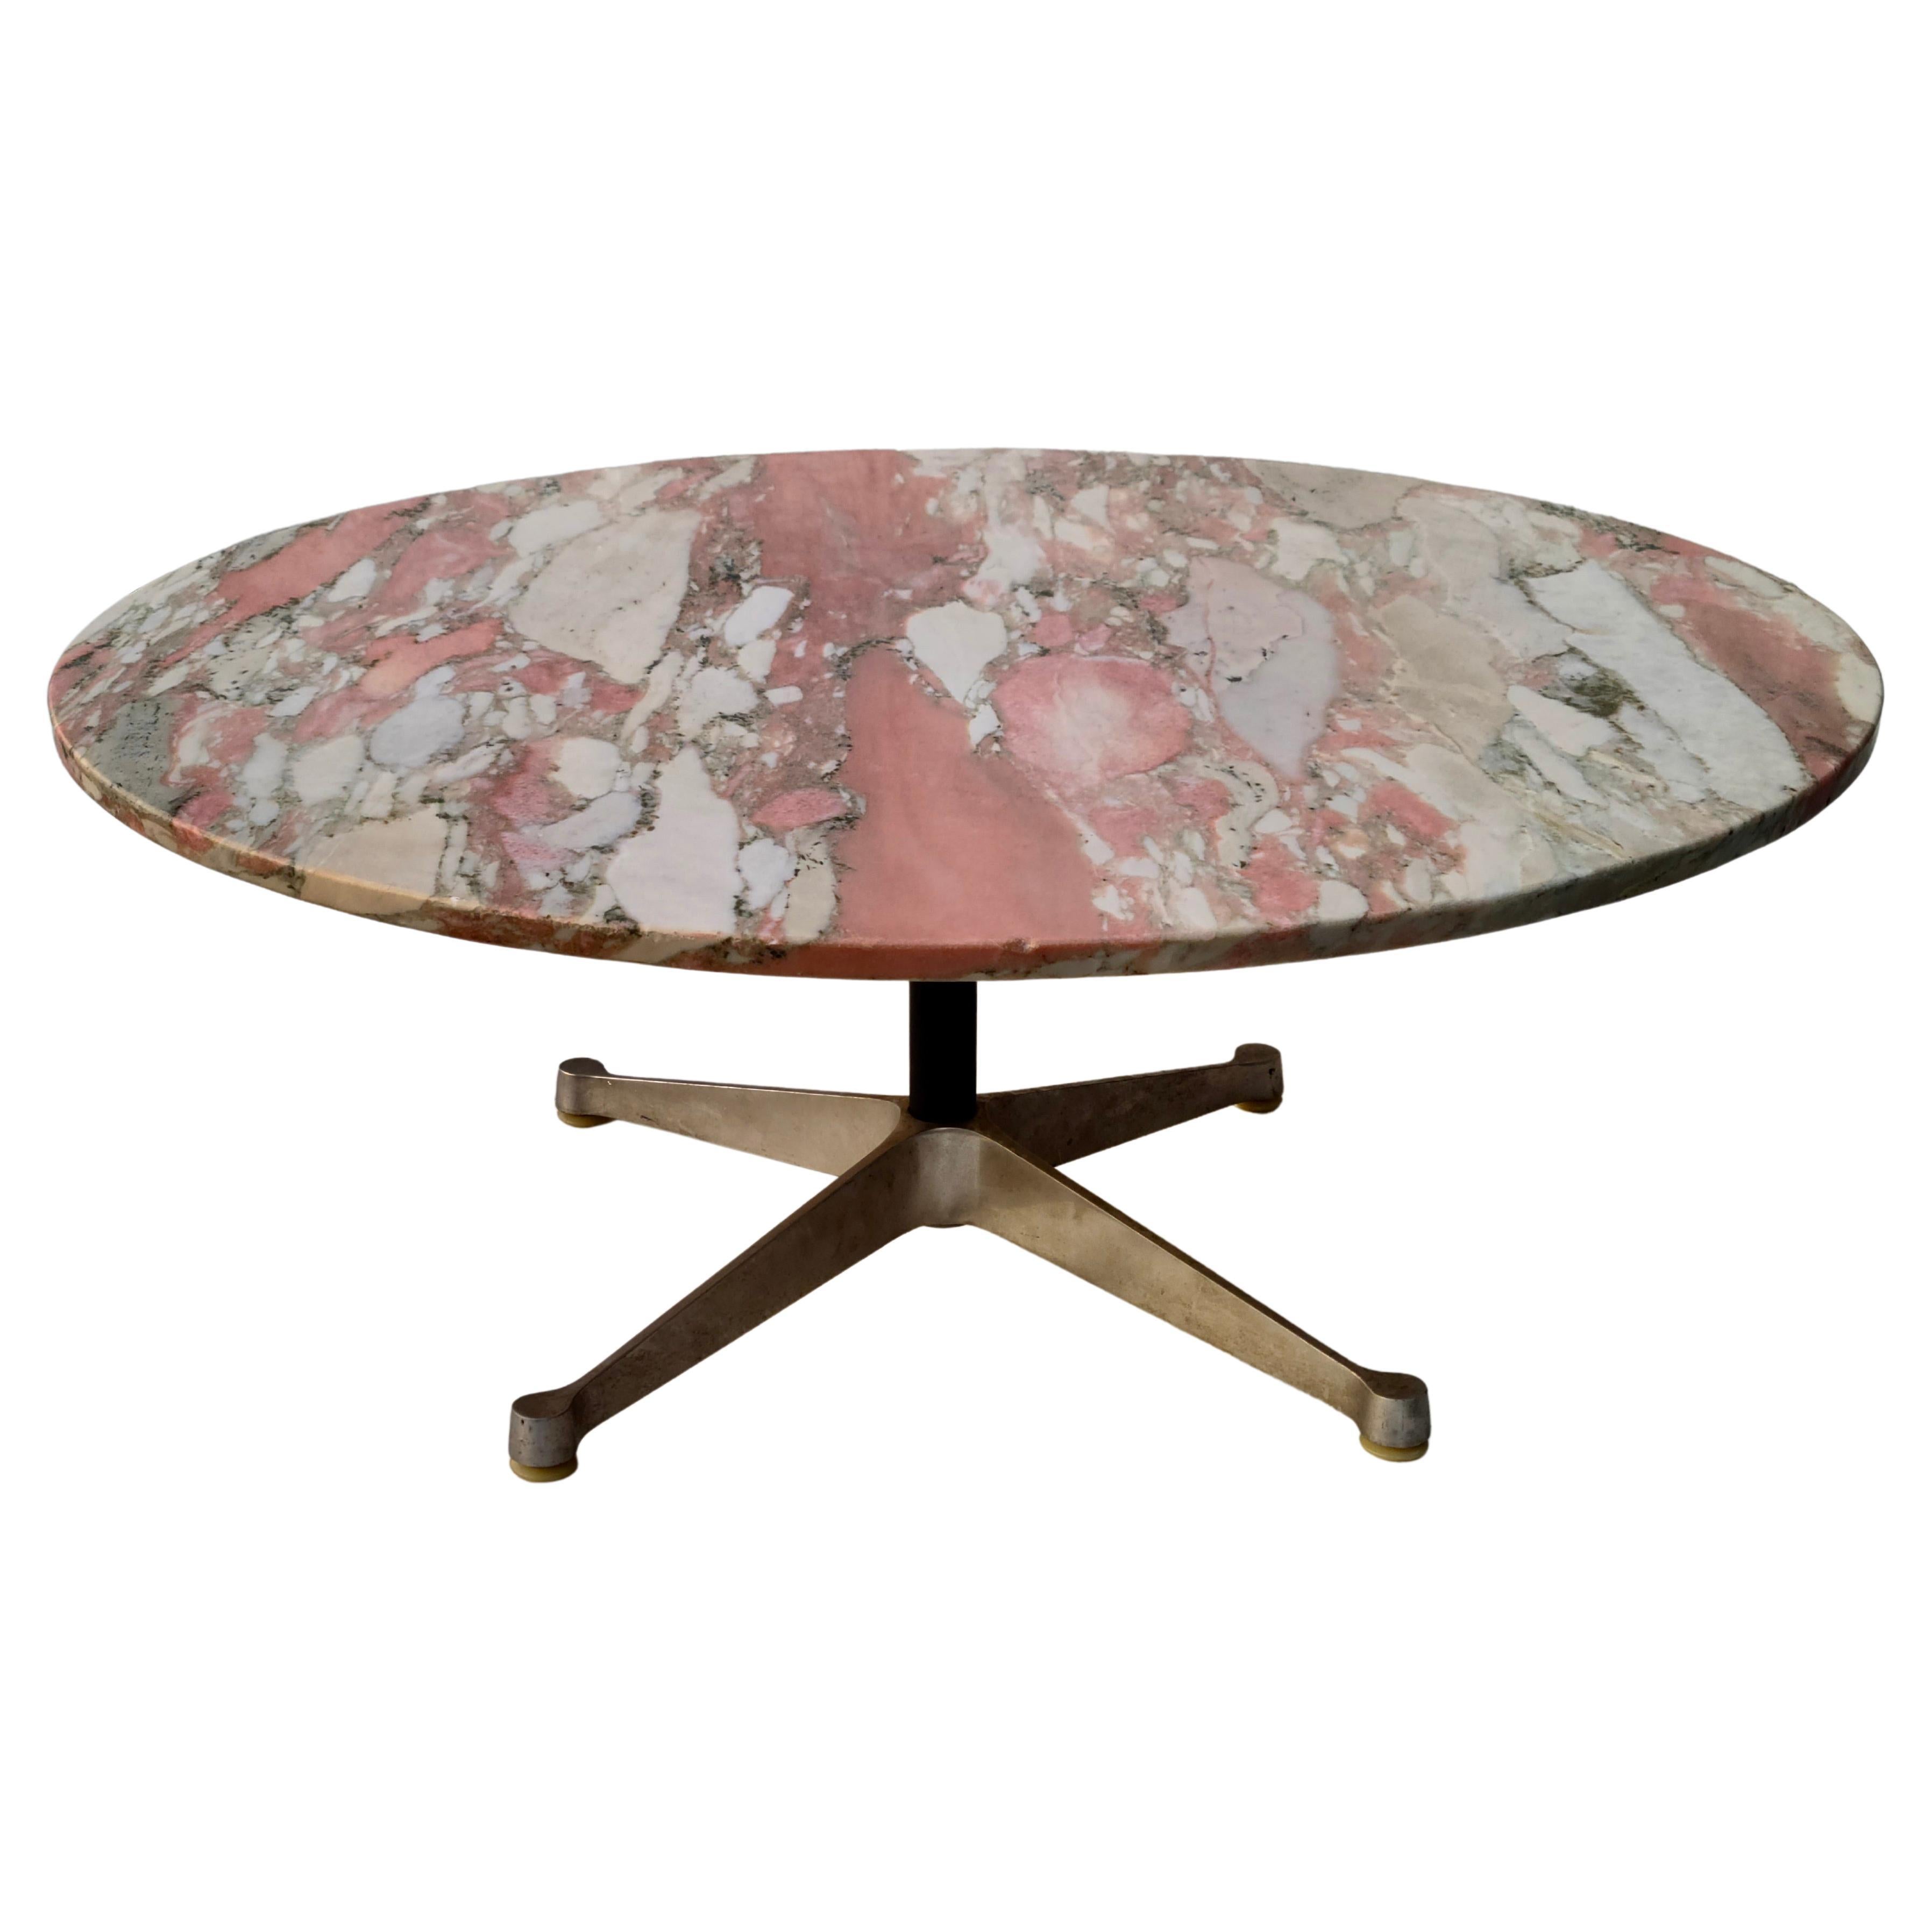 Eames Herman Miller Pink Marble Aluminum Group Coffee Table.